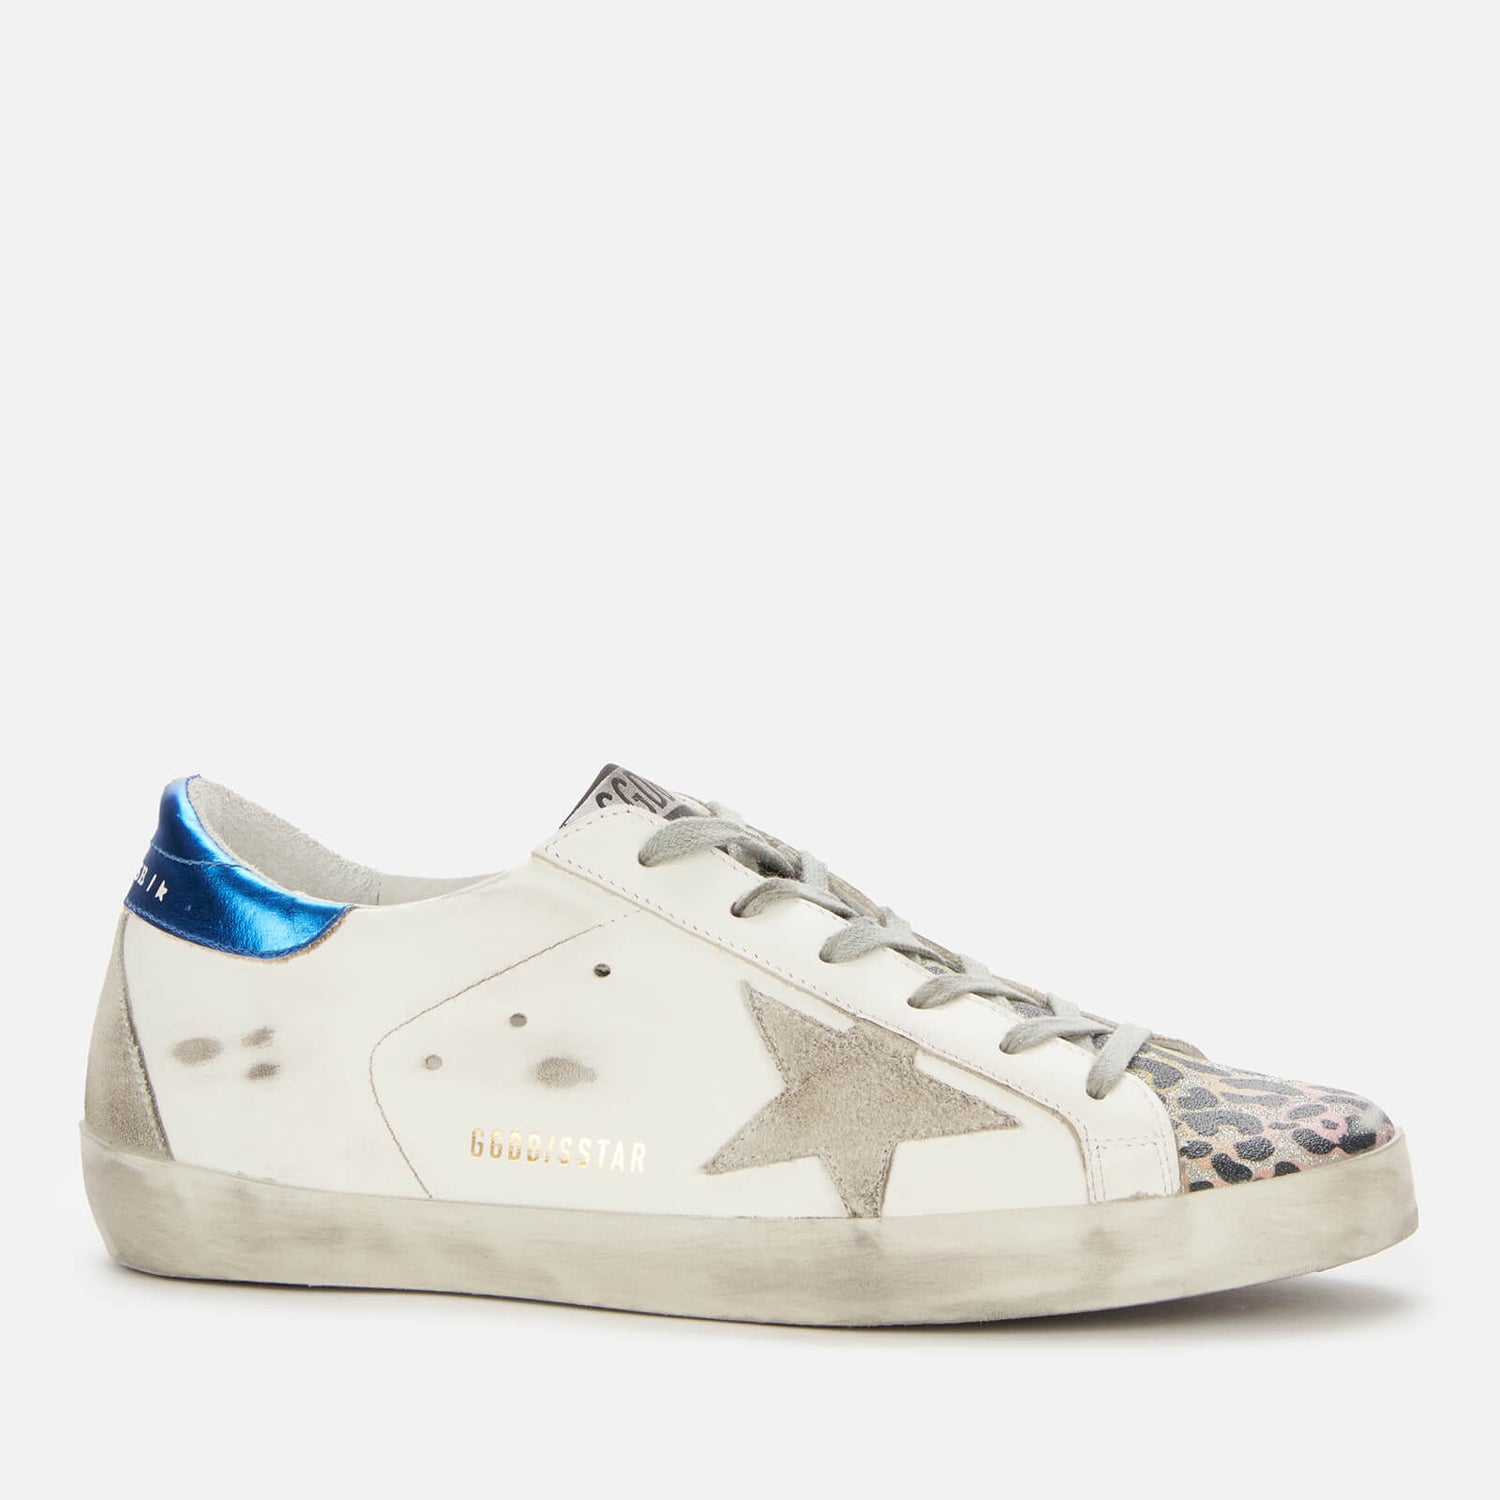 Golden Goose Women's Superstar Leather Trainers - White/Silver/Multi Leopard - UK 4